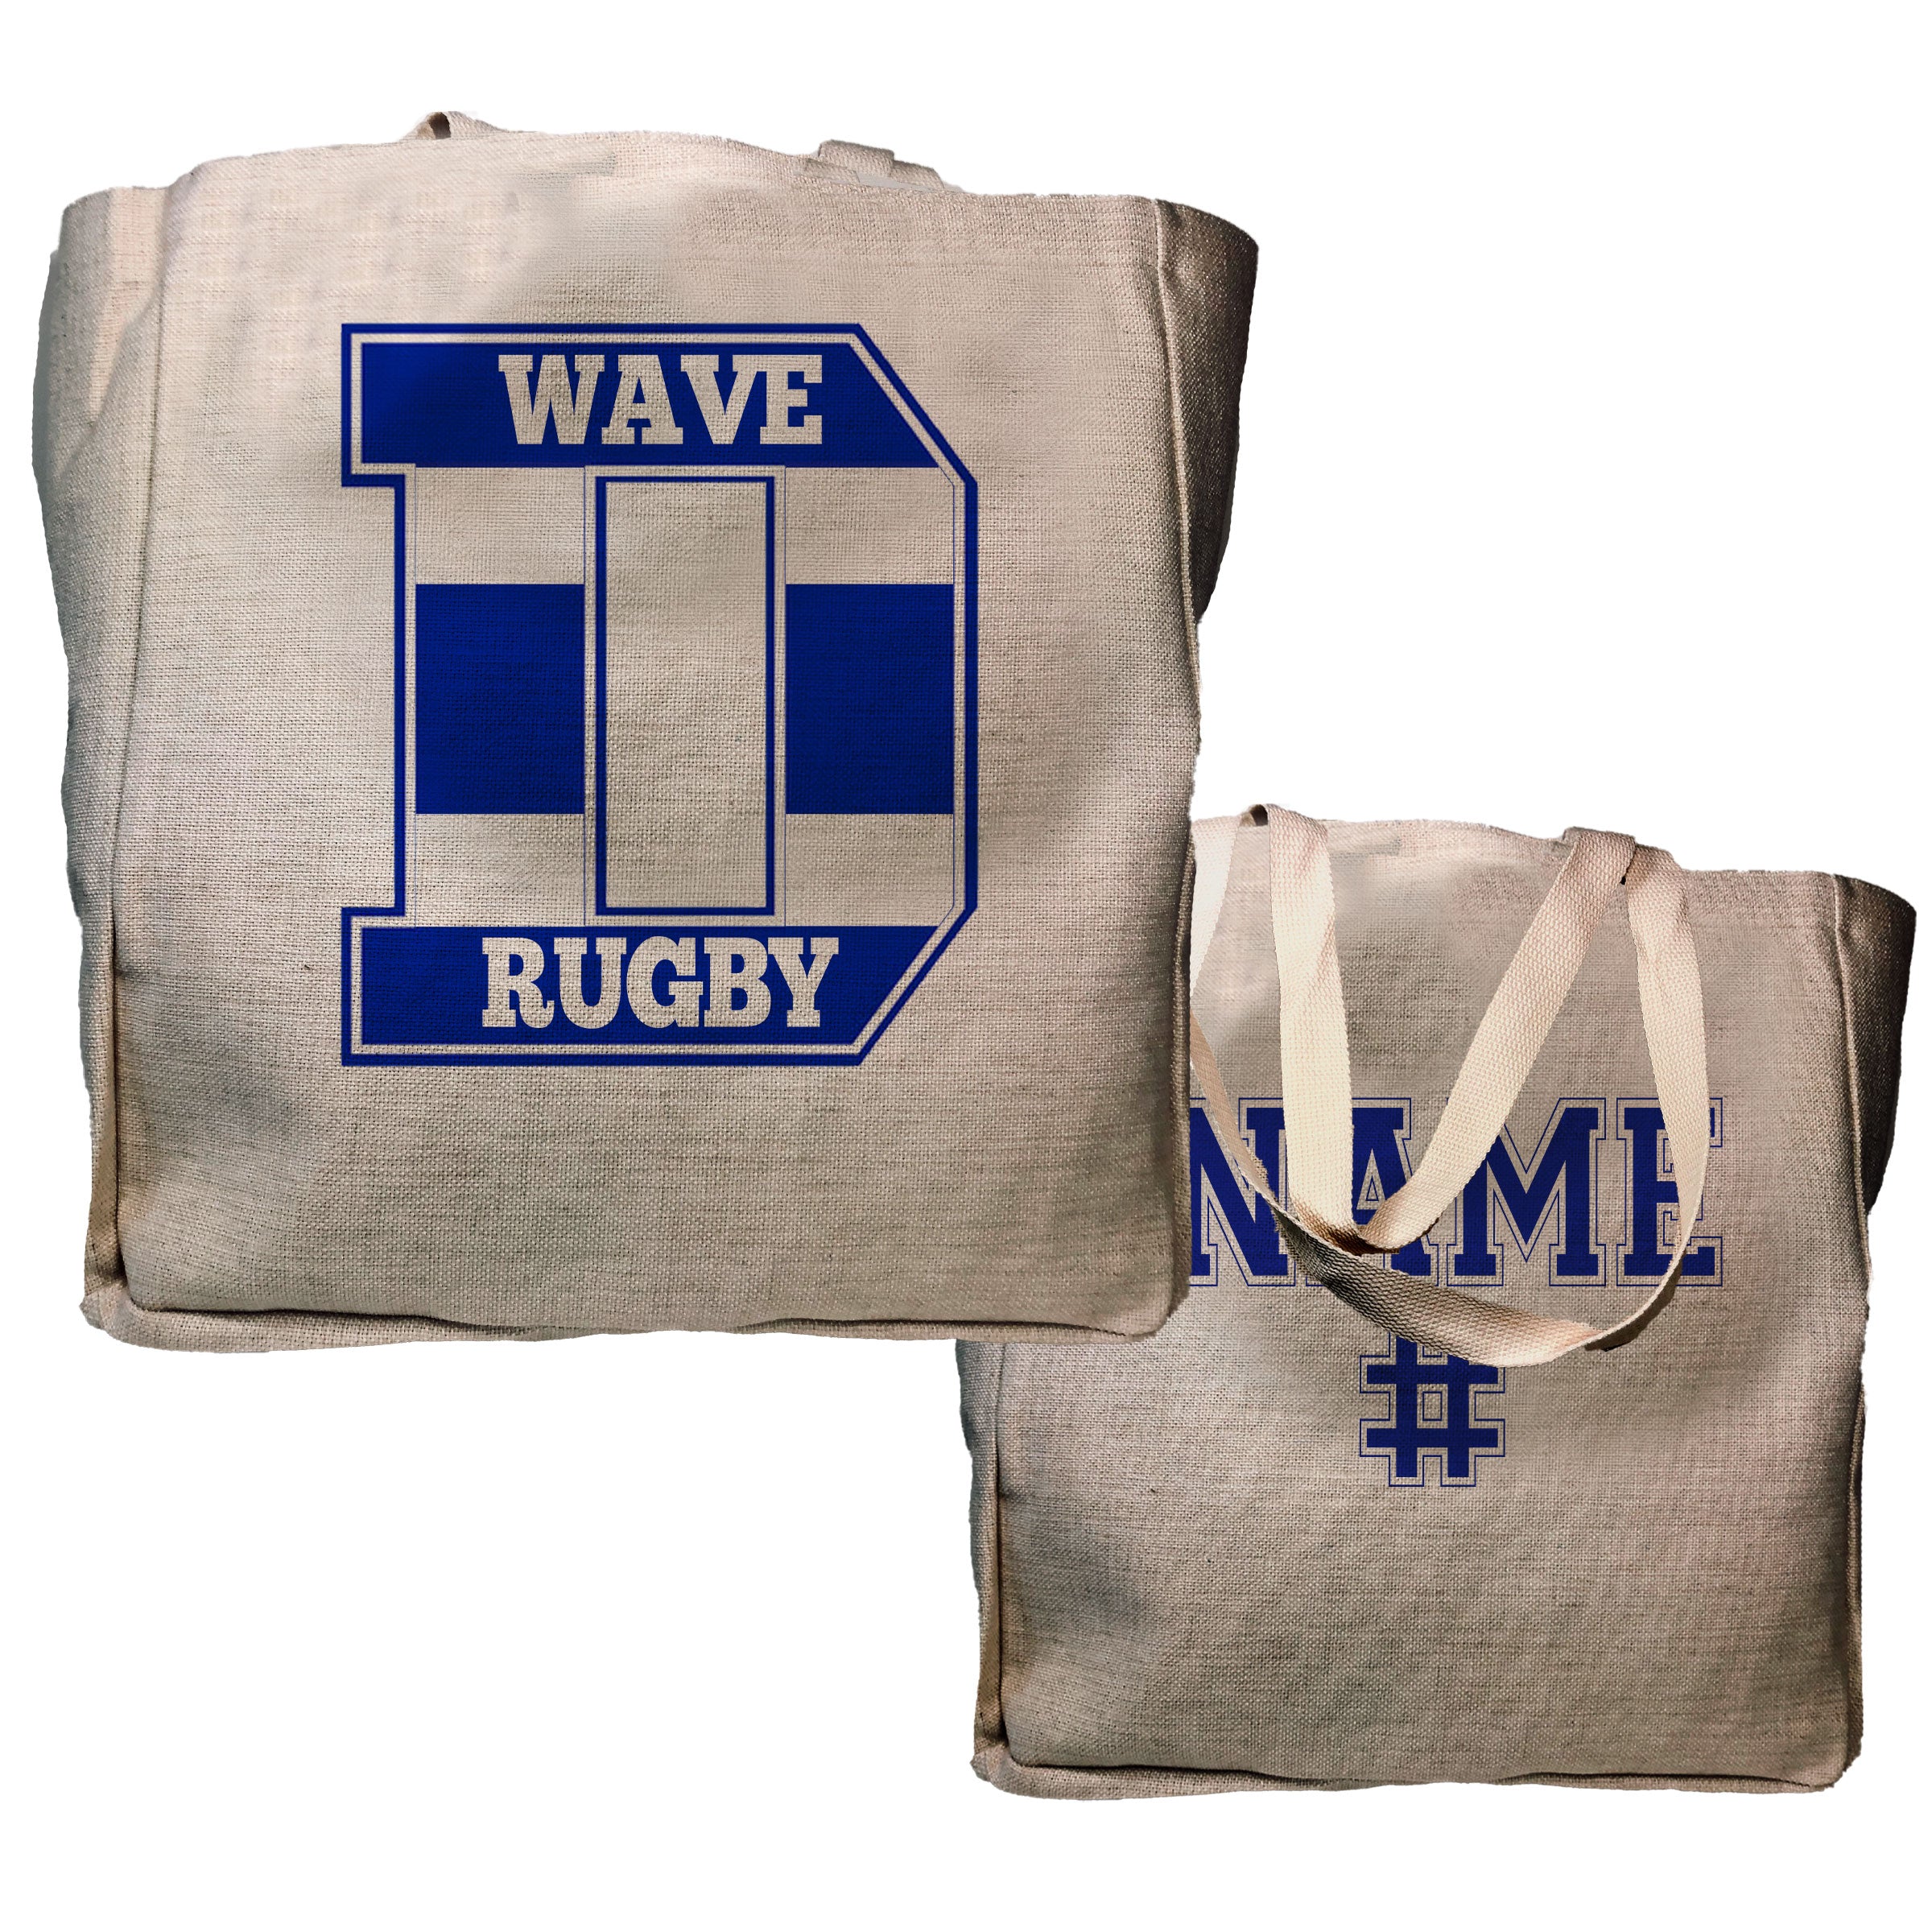 Blue Wave Rugby Tote - Name & Number